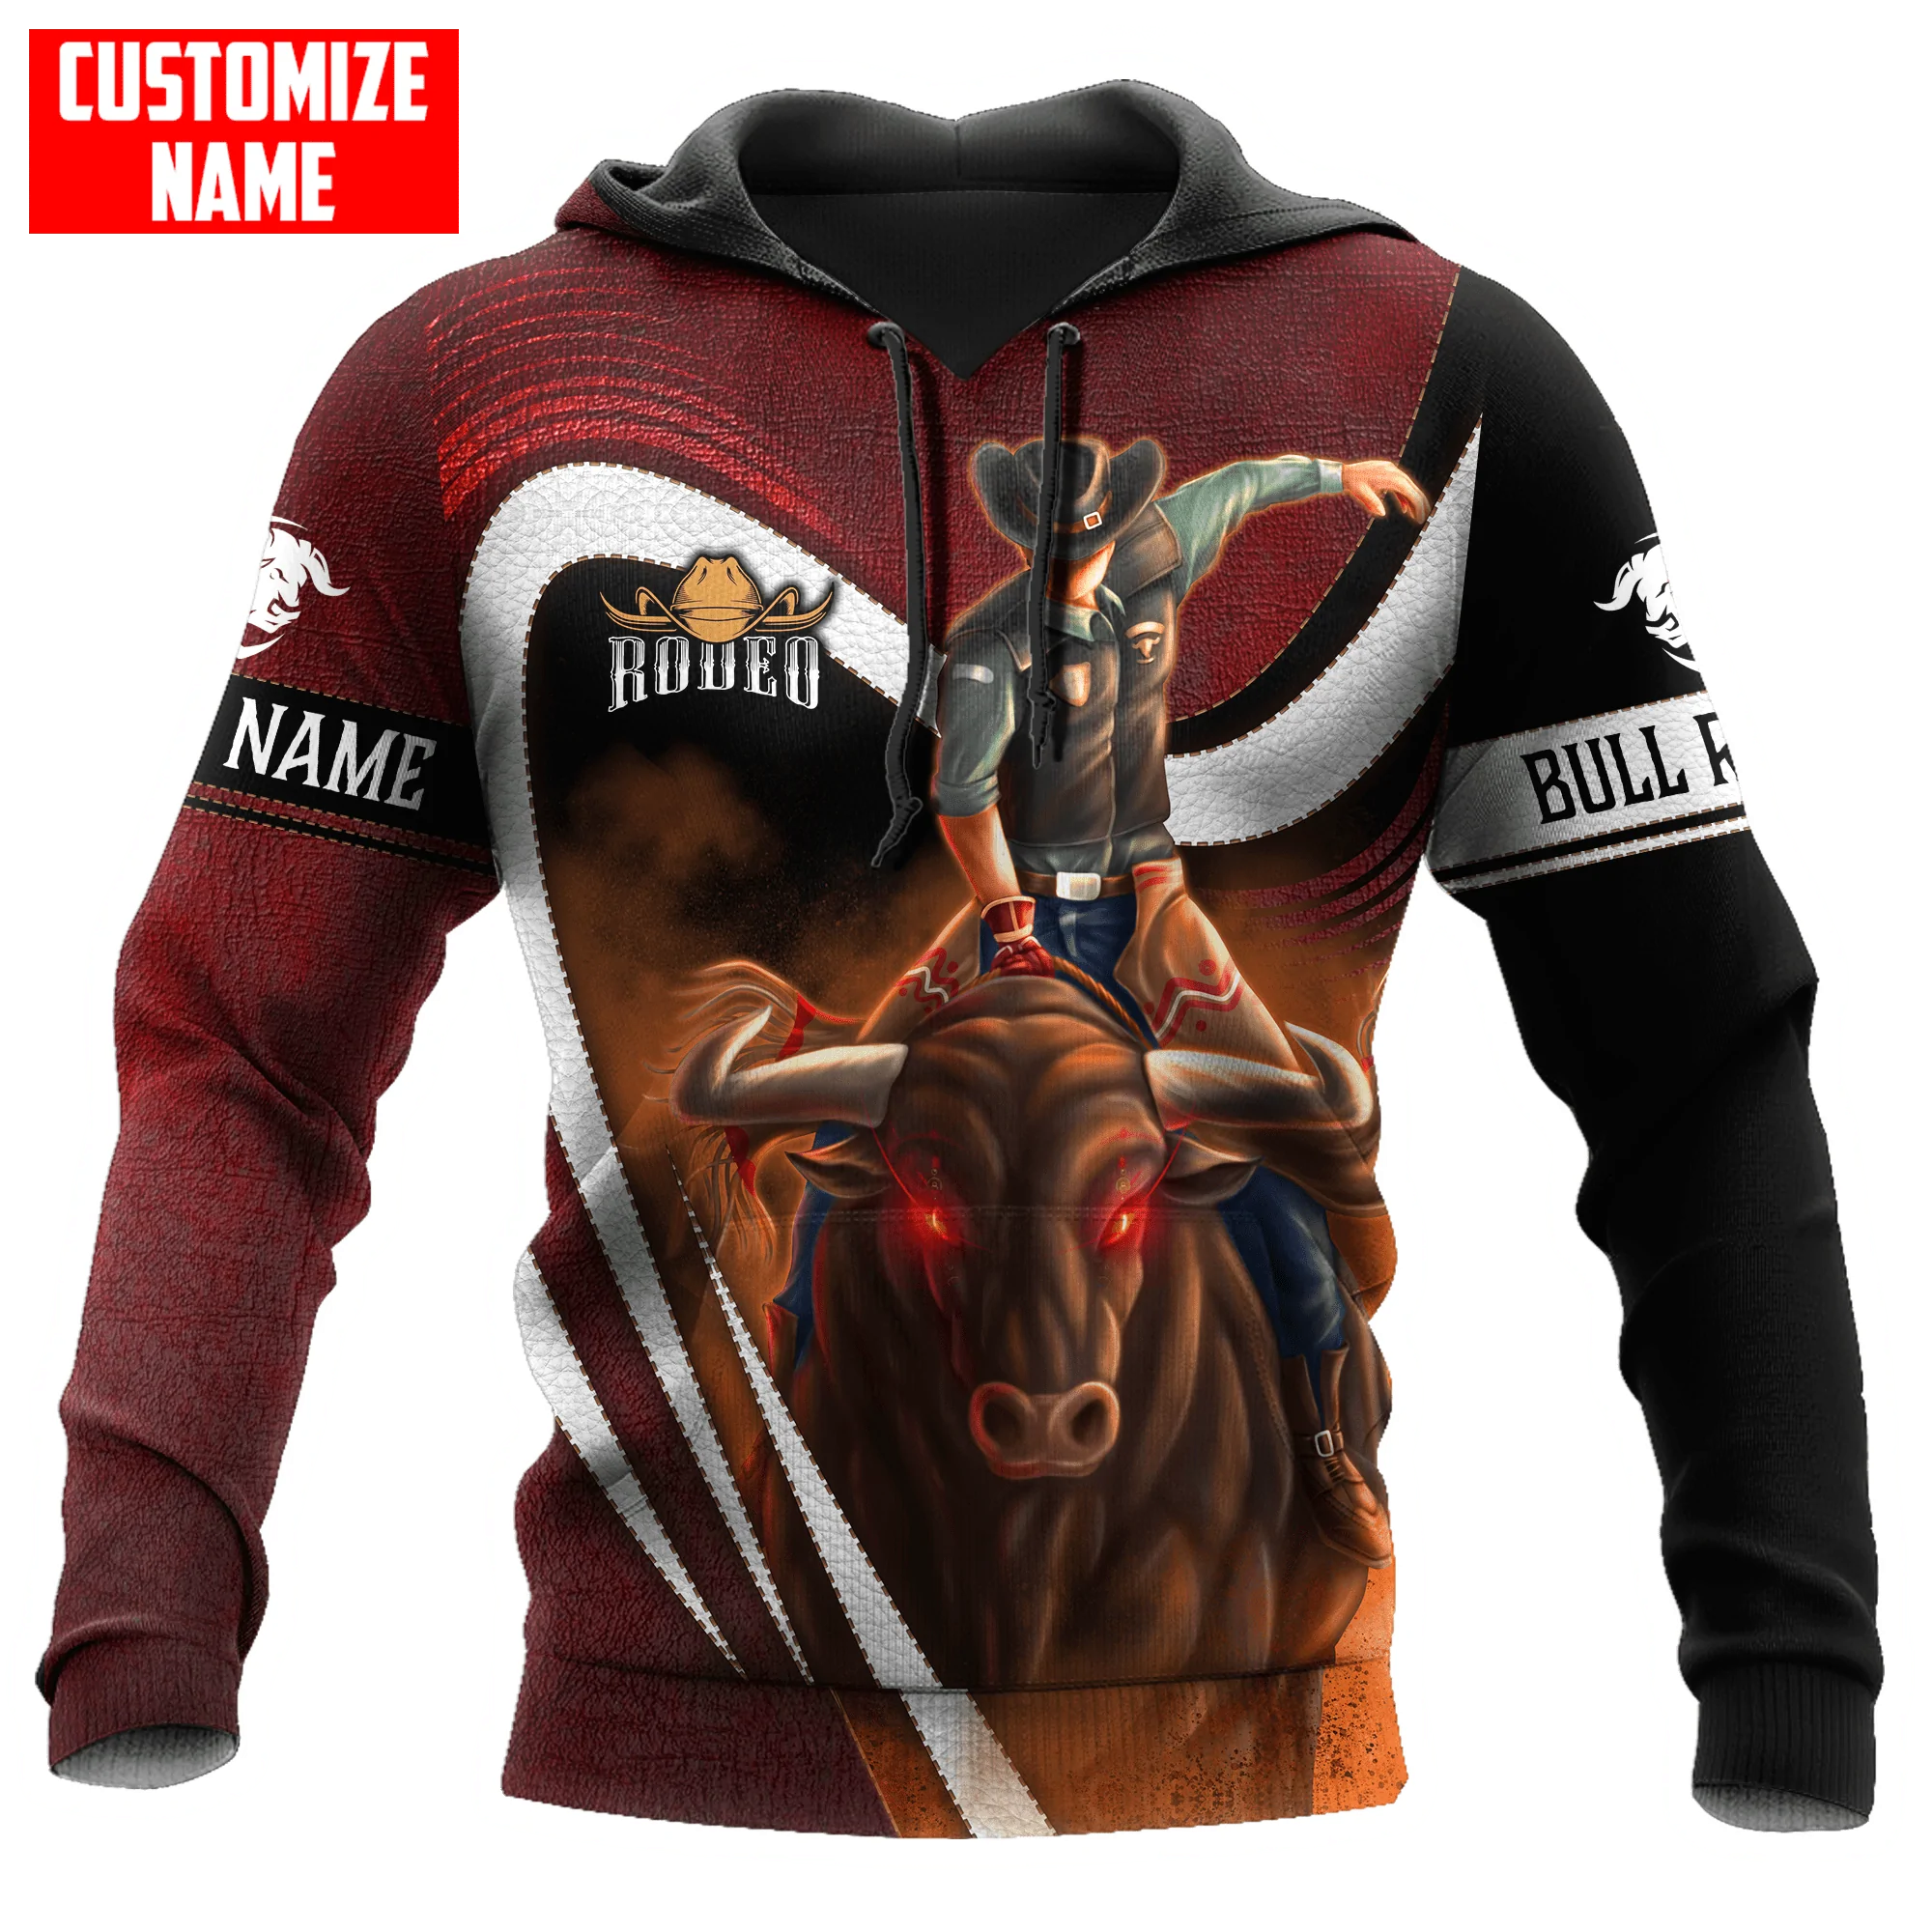 Customized Bull Riding Hoodies For Men And Women/ American Cowboy Hoodies